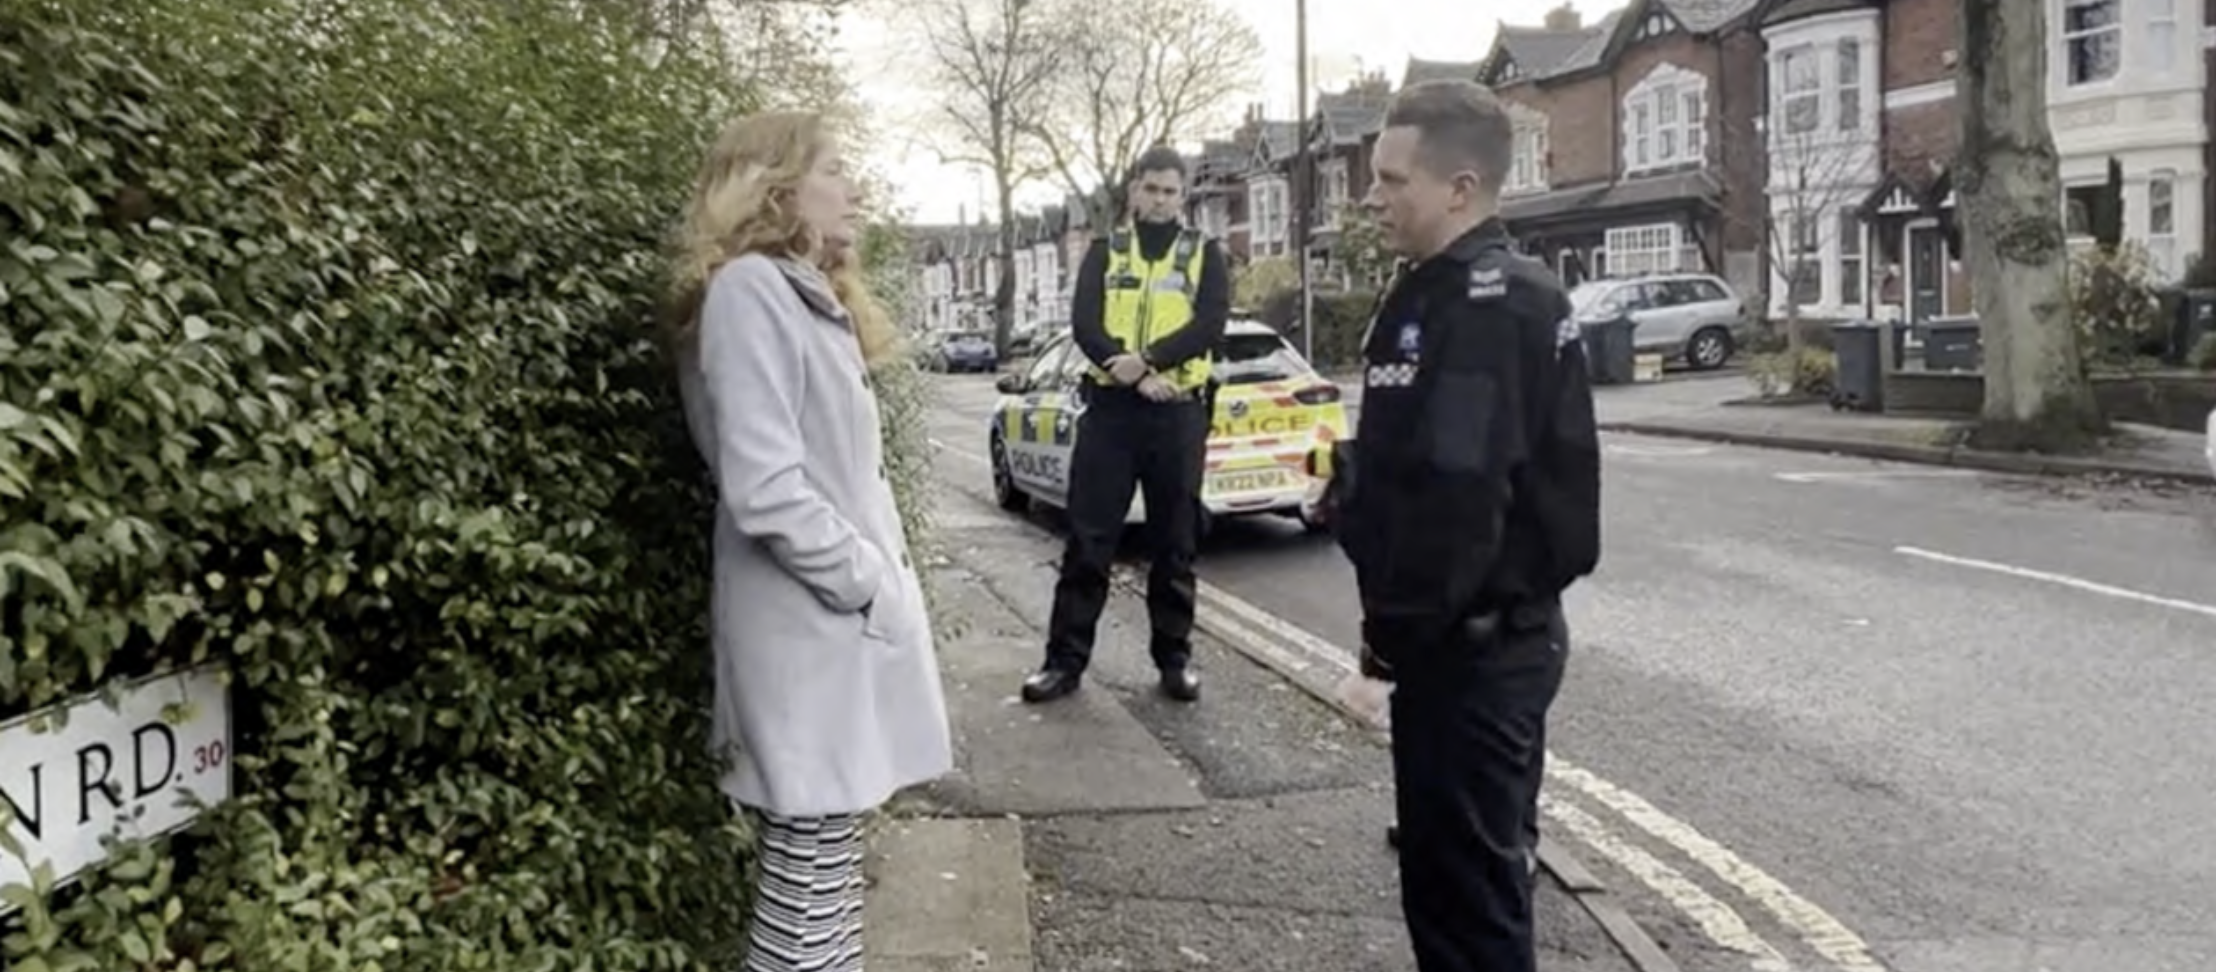 Woman arrested for silently praying outside abortion clinic in UK